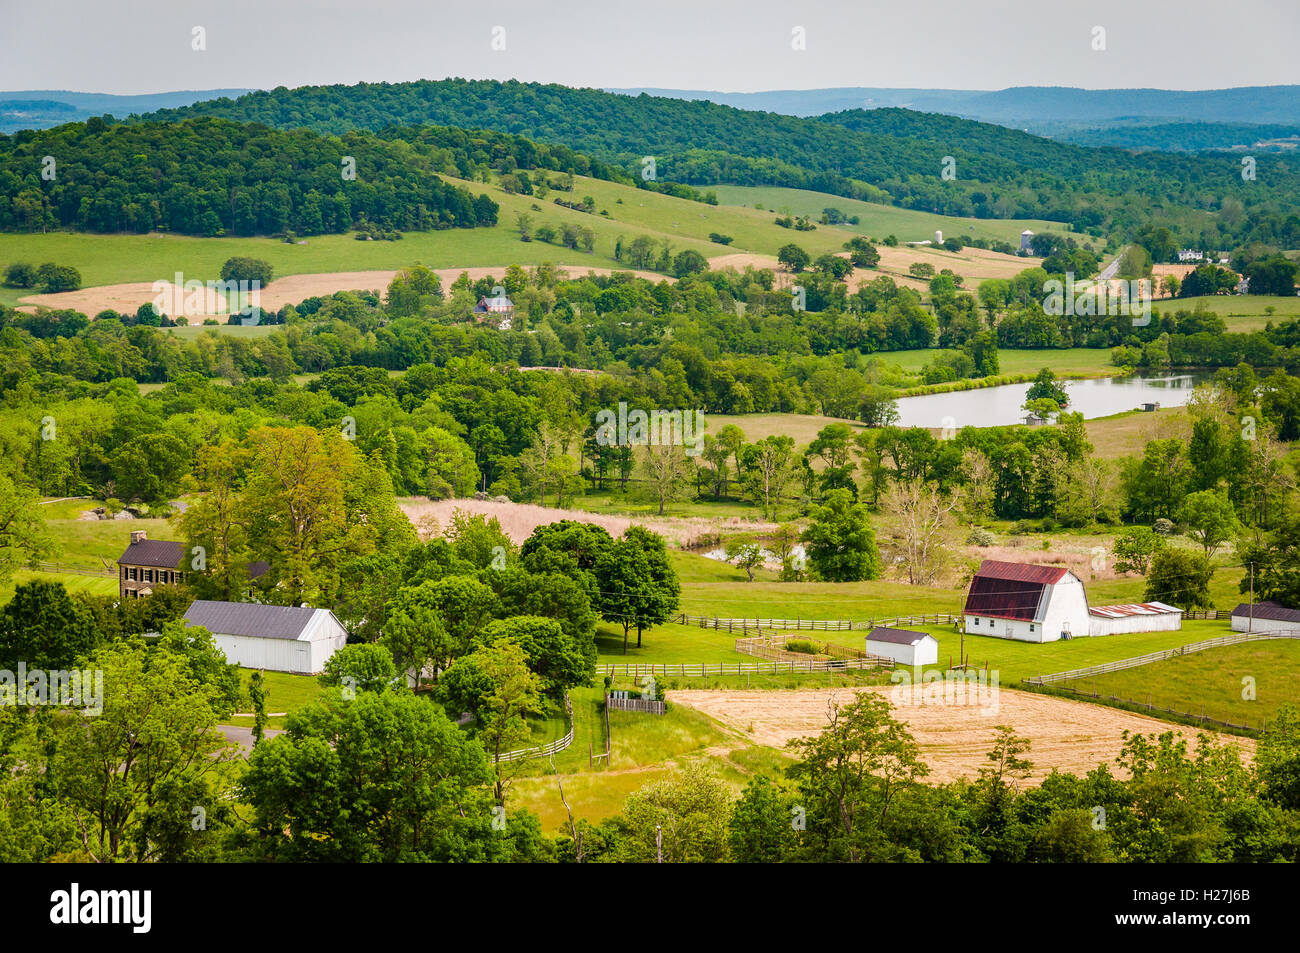 View of farms and hills from Sky Meadows State Park, in the rural Shenandoah Valley of Virginia. Stock Photo